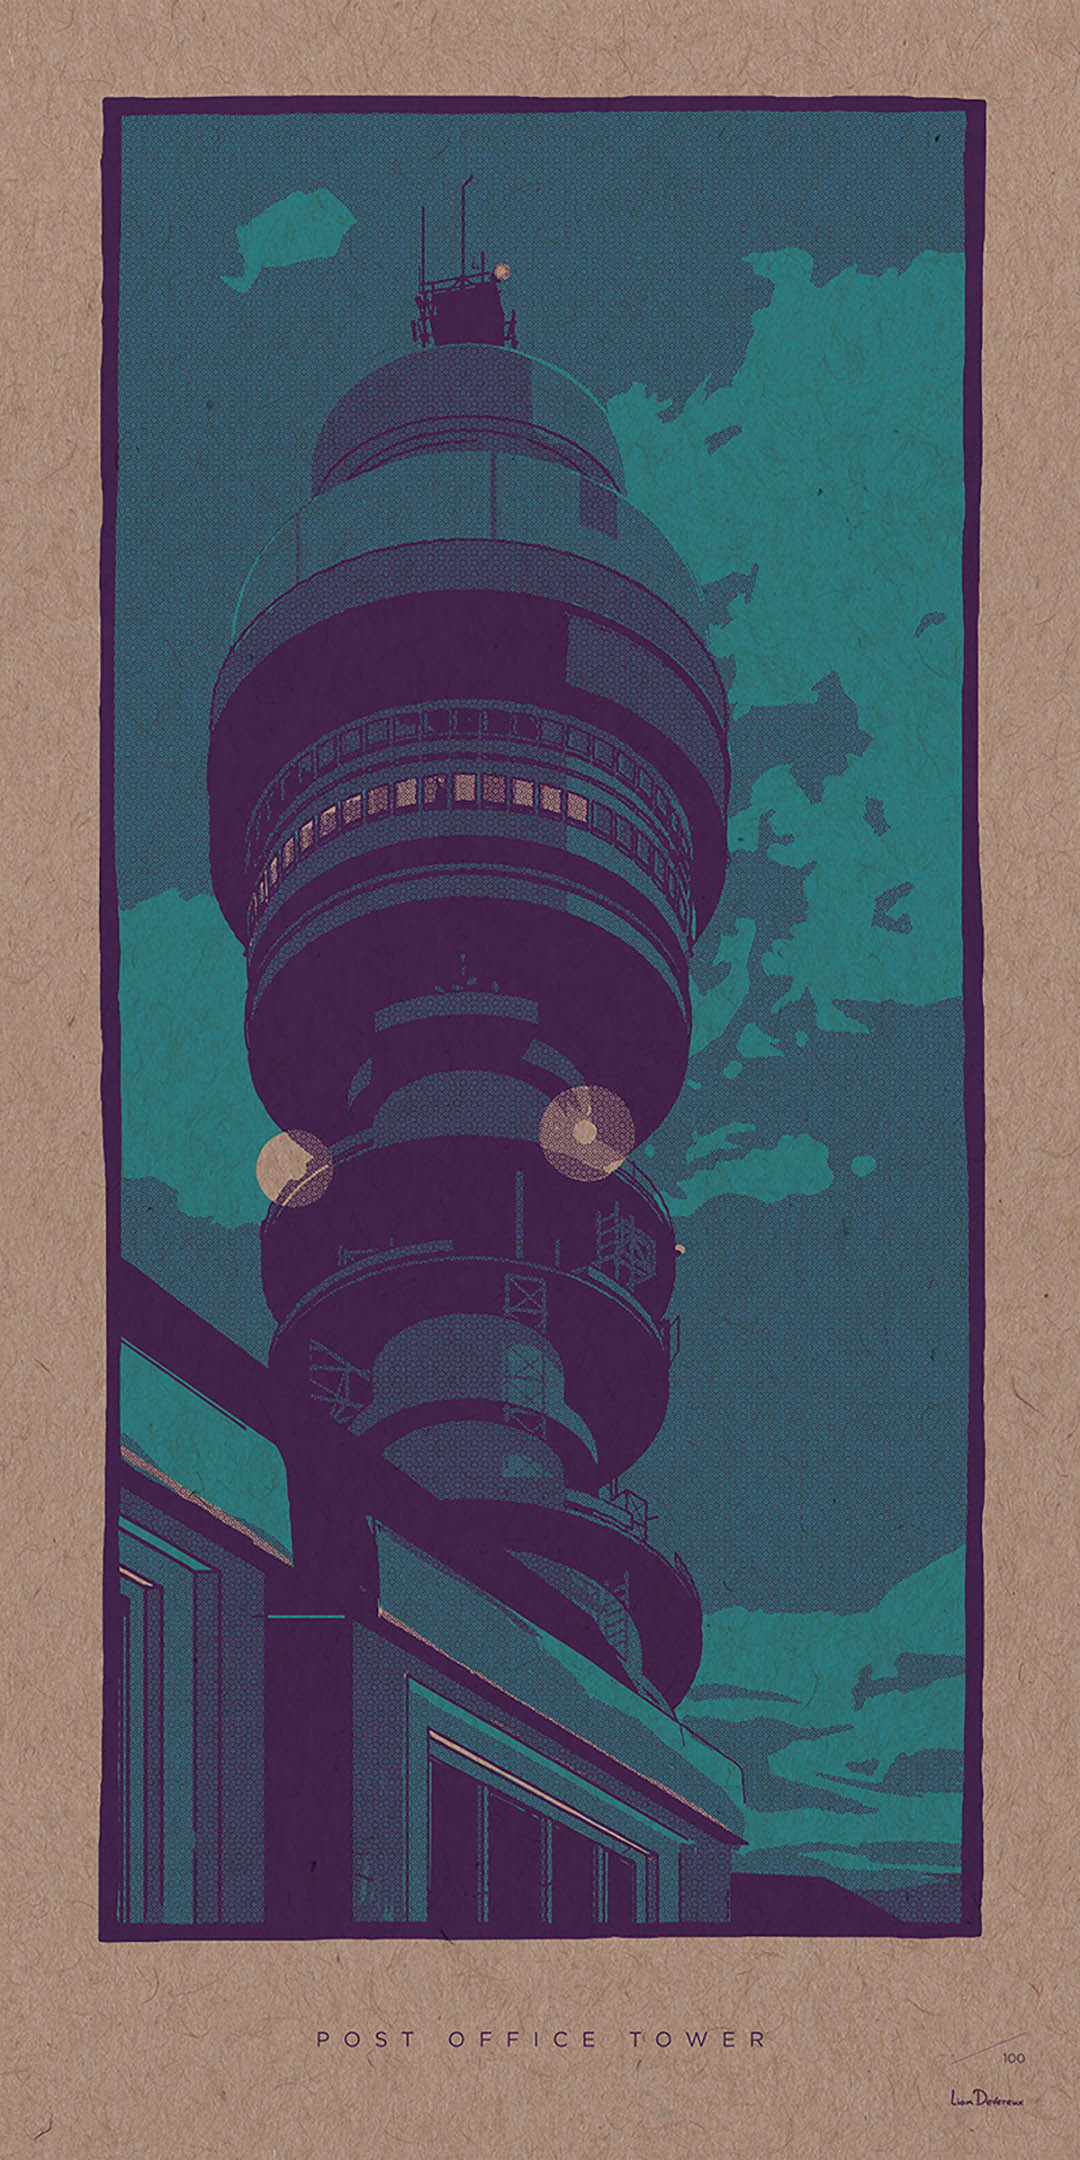 Post Office Tower - Liam Devereux | 30x60mm Giclee print on 450mic recycled Kraft card